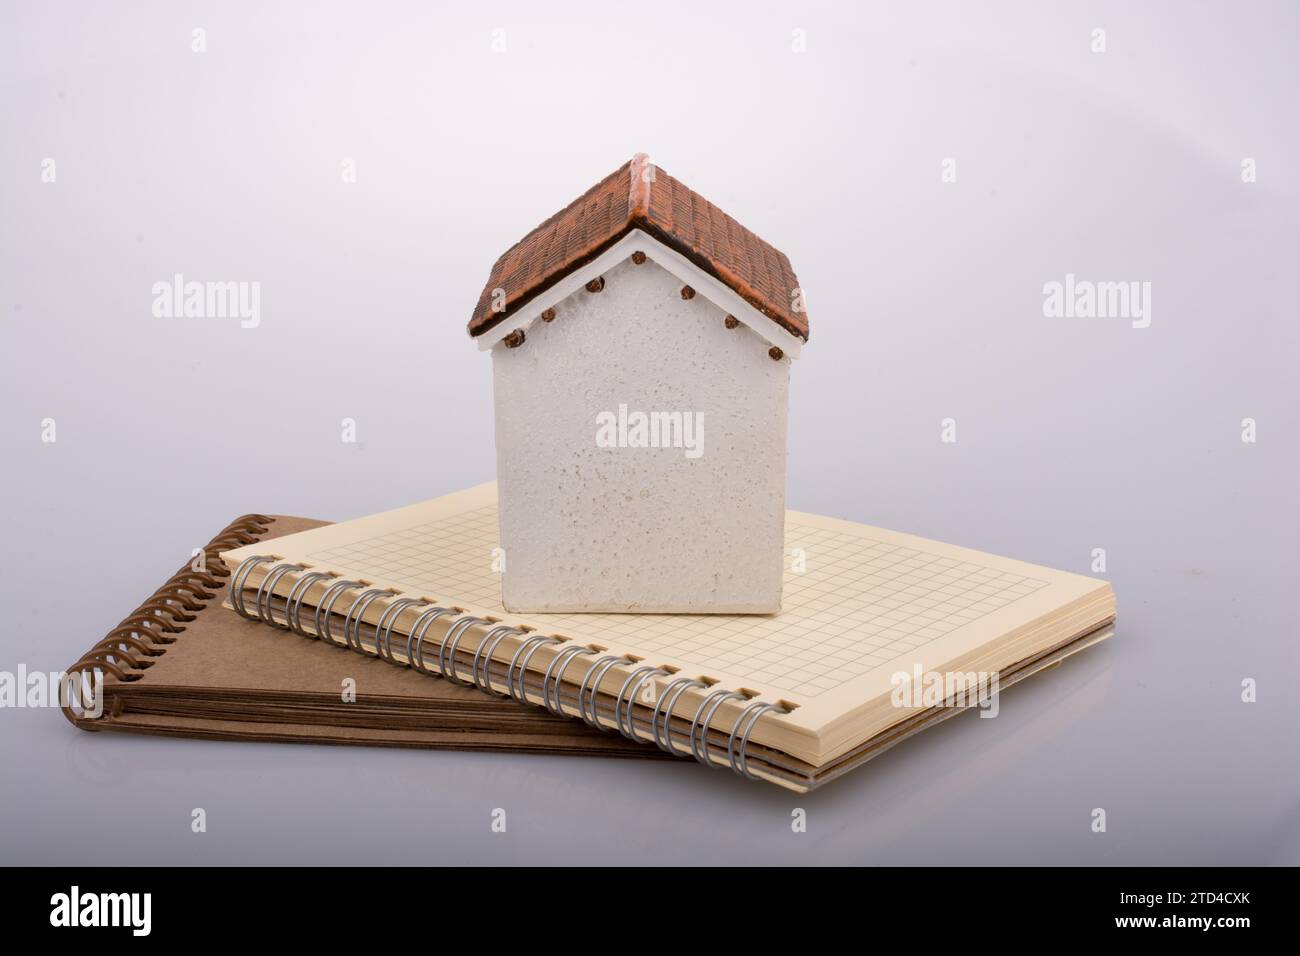 Little model house placed on an a brown color notebook Stock Photo